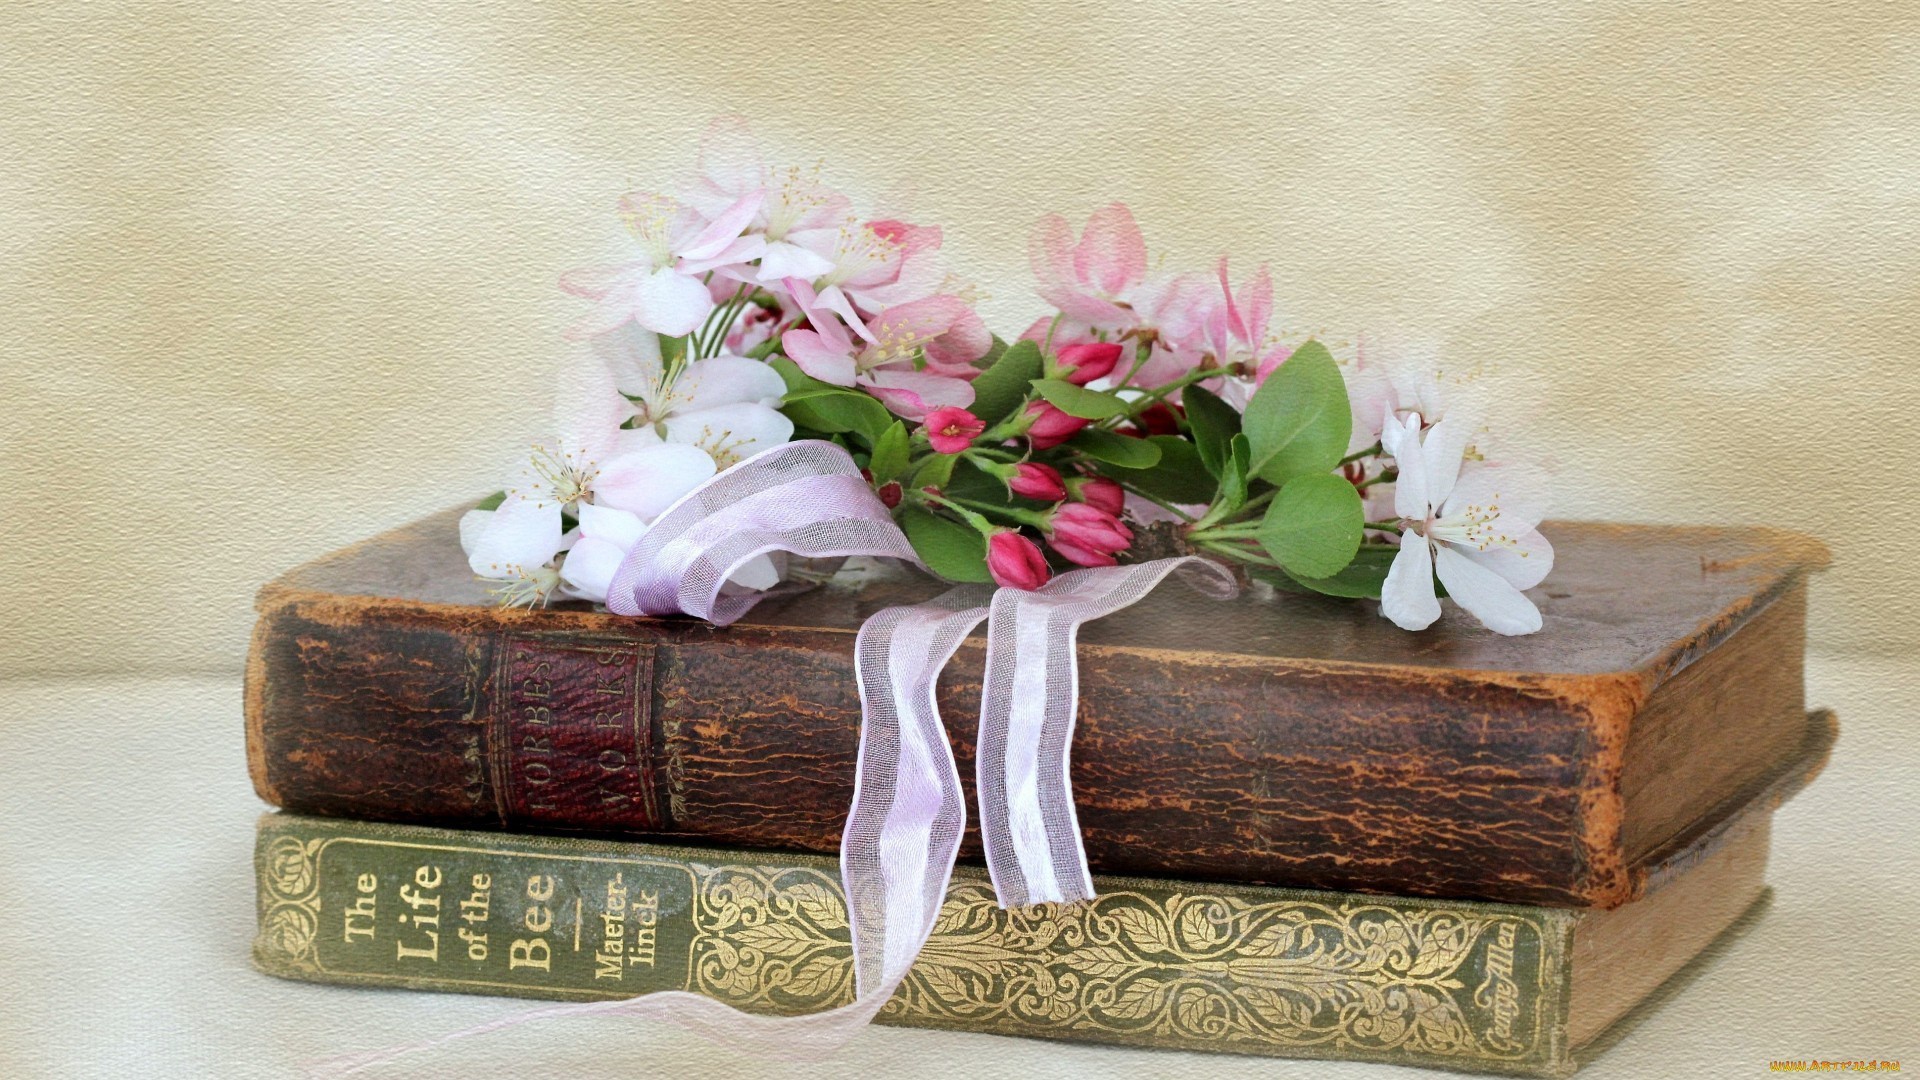 flowers_on_old_books-1920x1080[1]